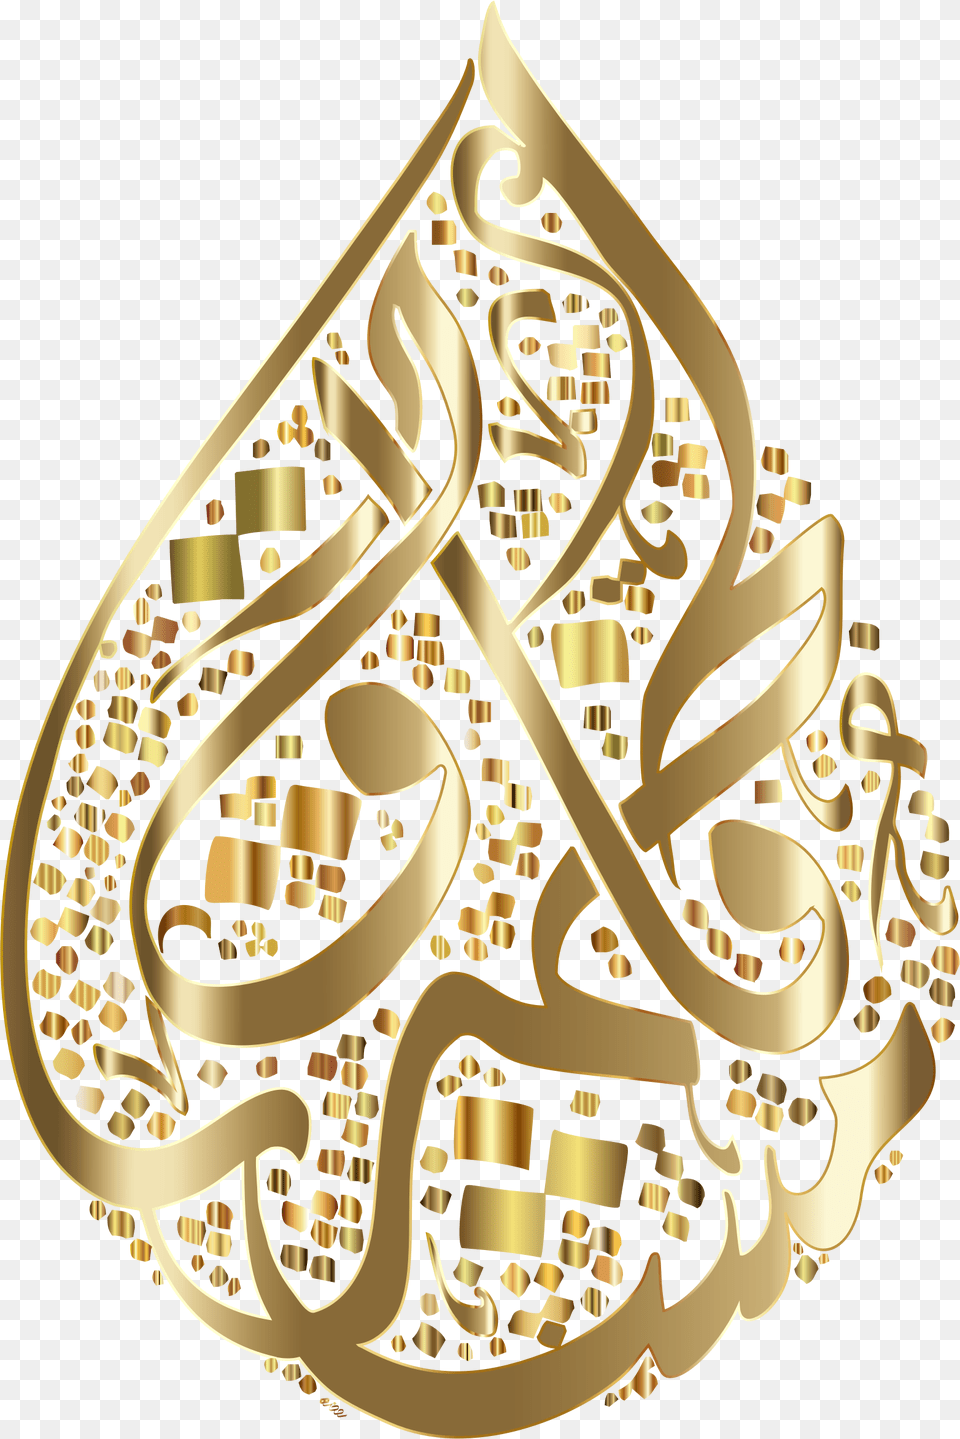 Big Arabic Symbol Of Love, Accessories, Gold, Chandelier, Lamp Png Image